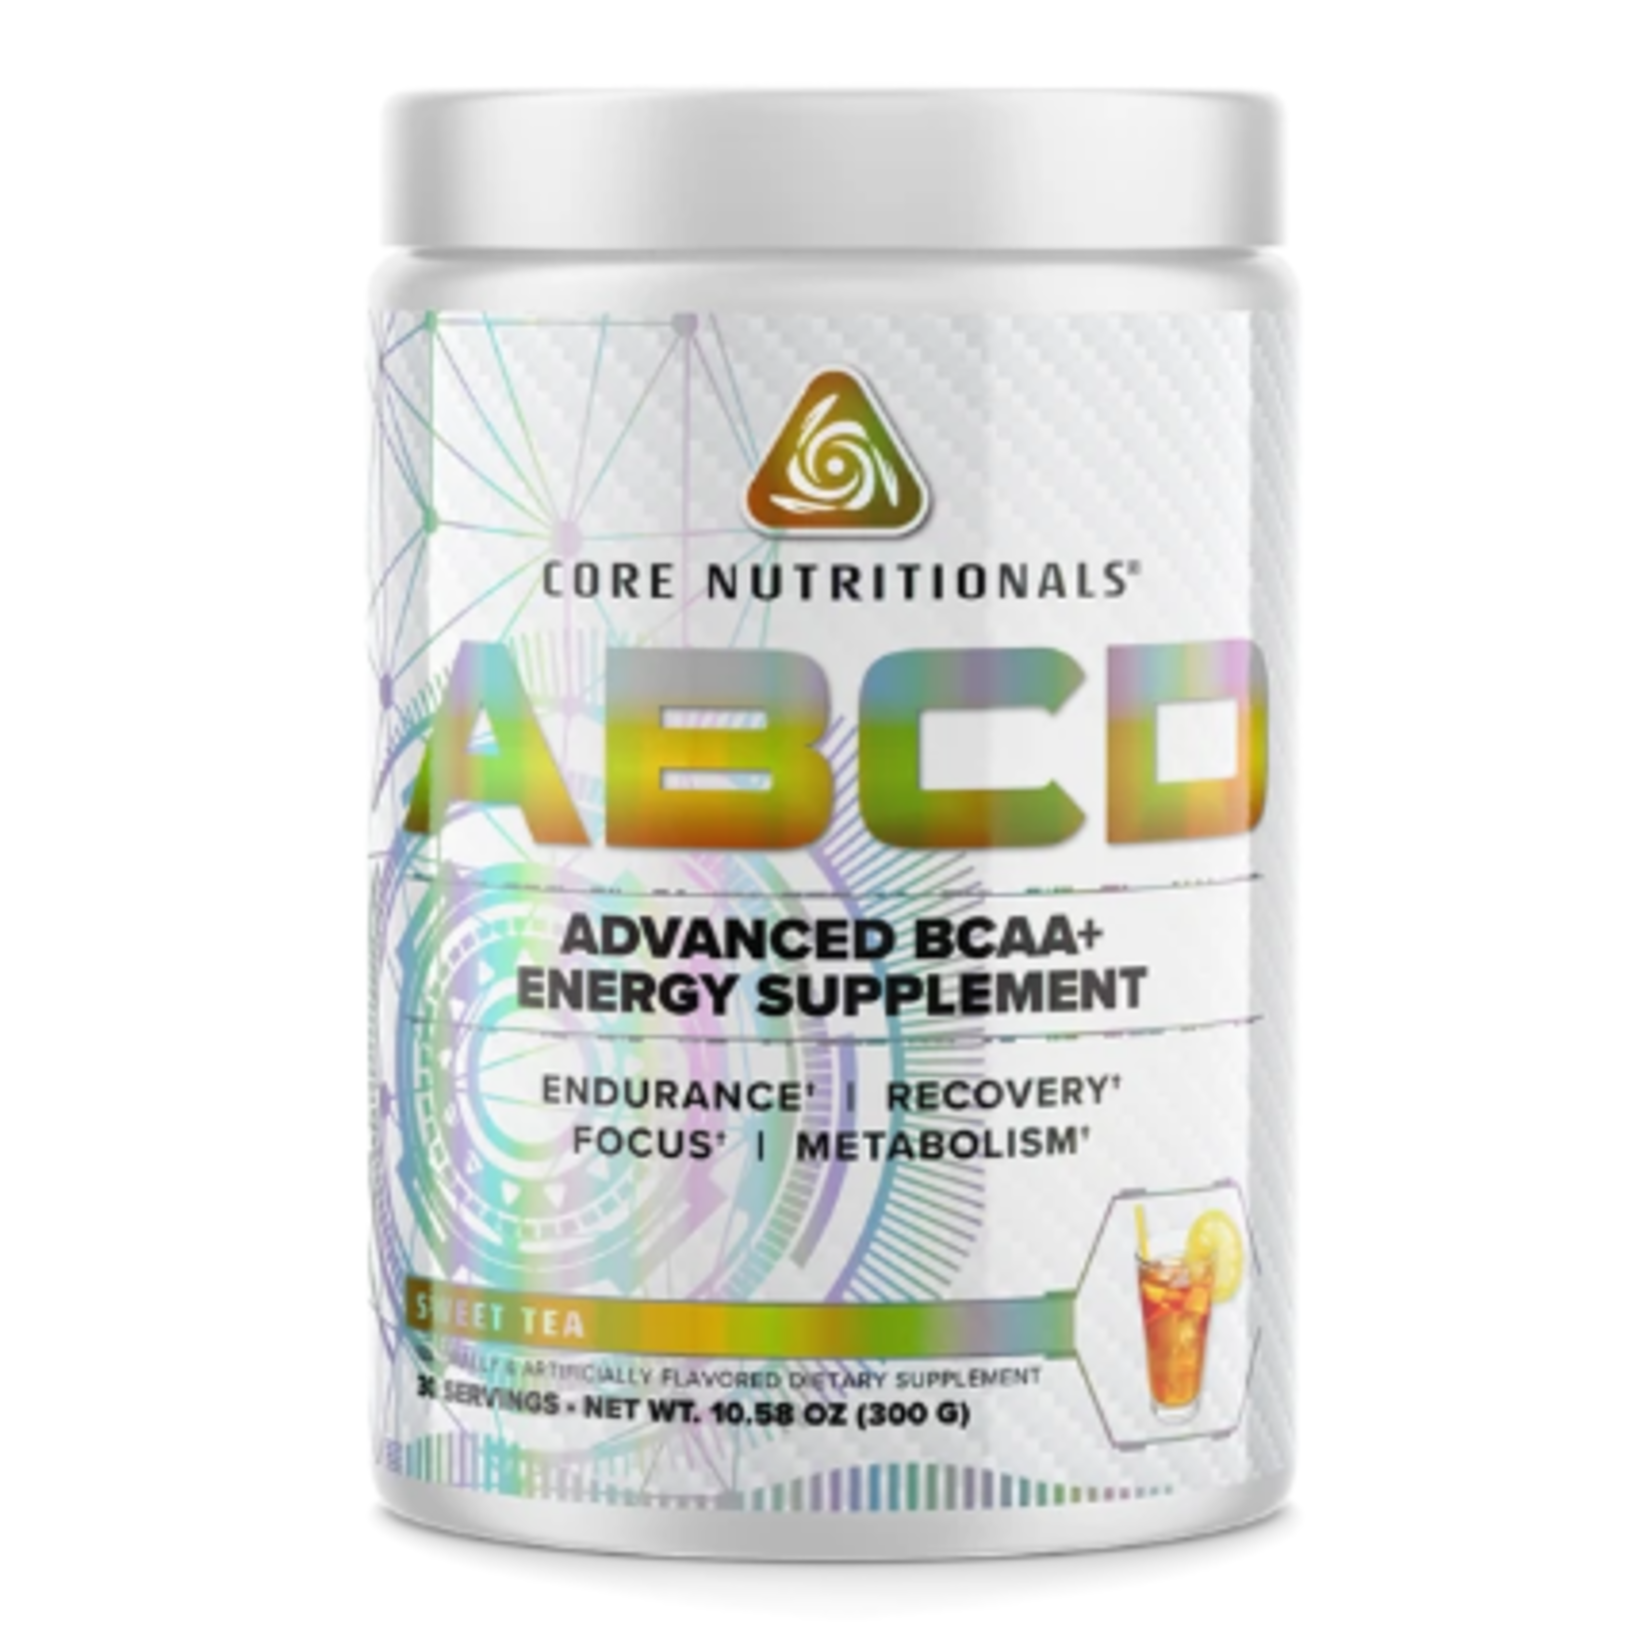 Core Nutritionals Core ABCD